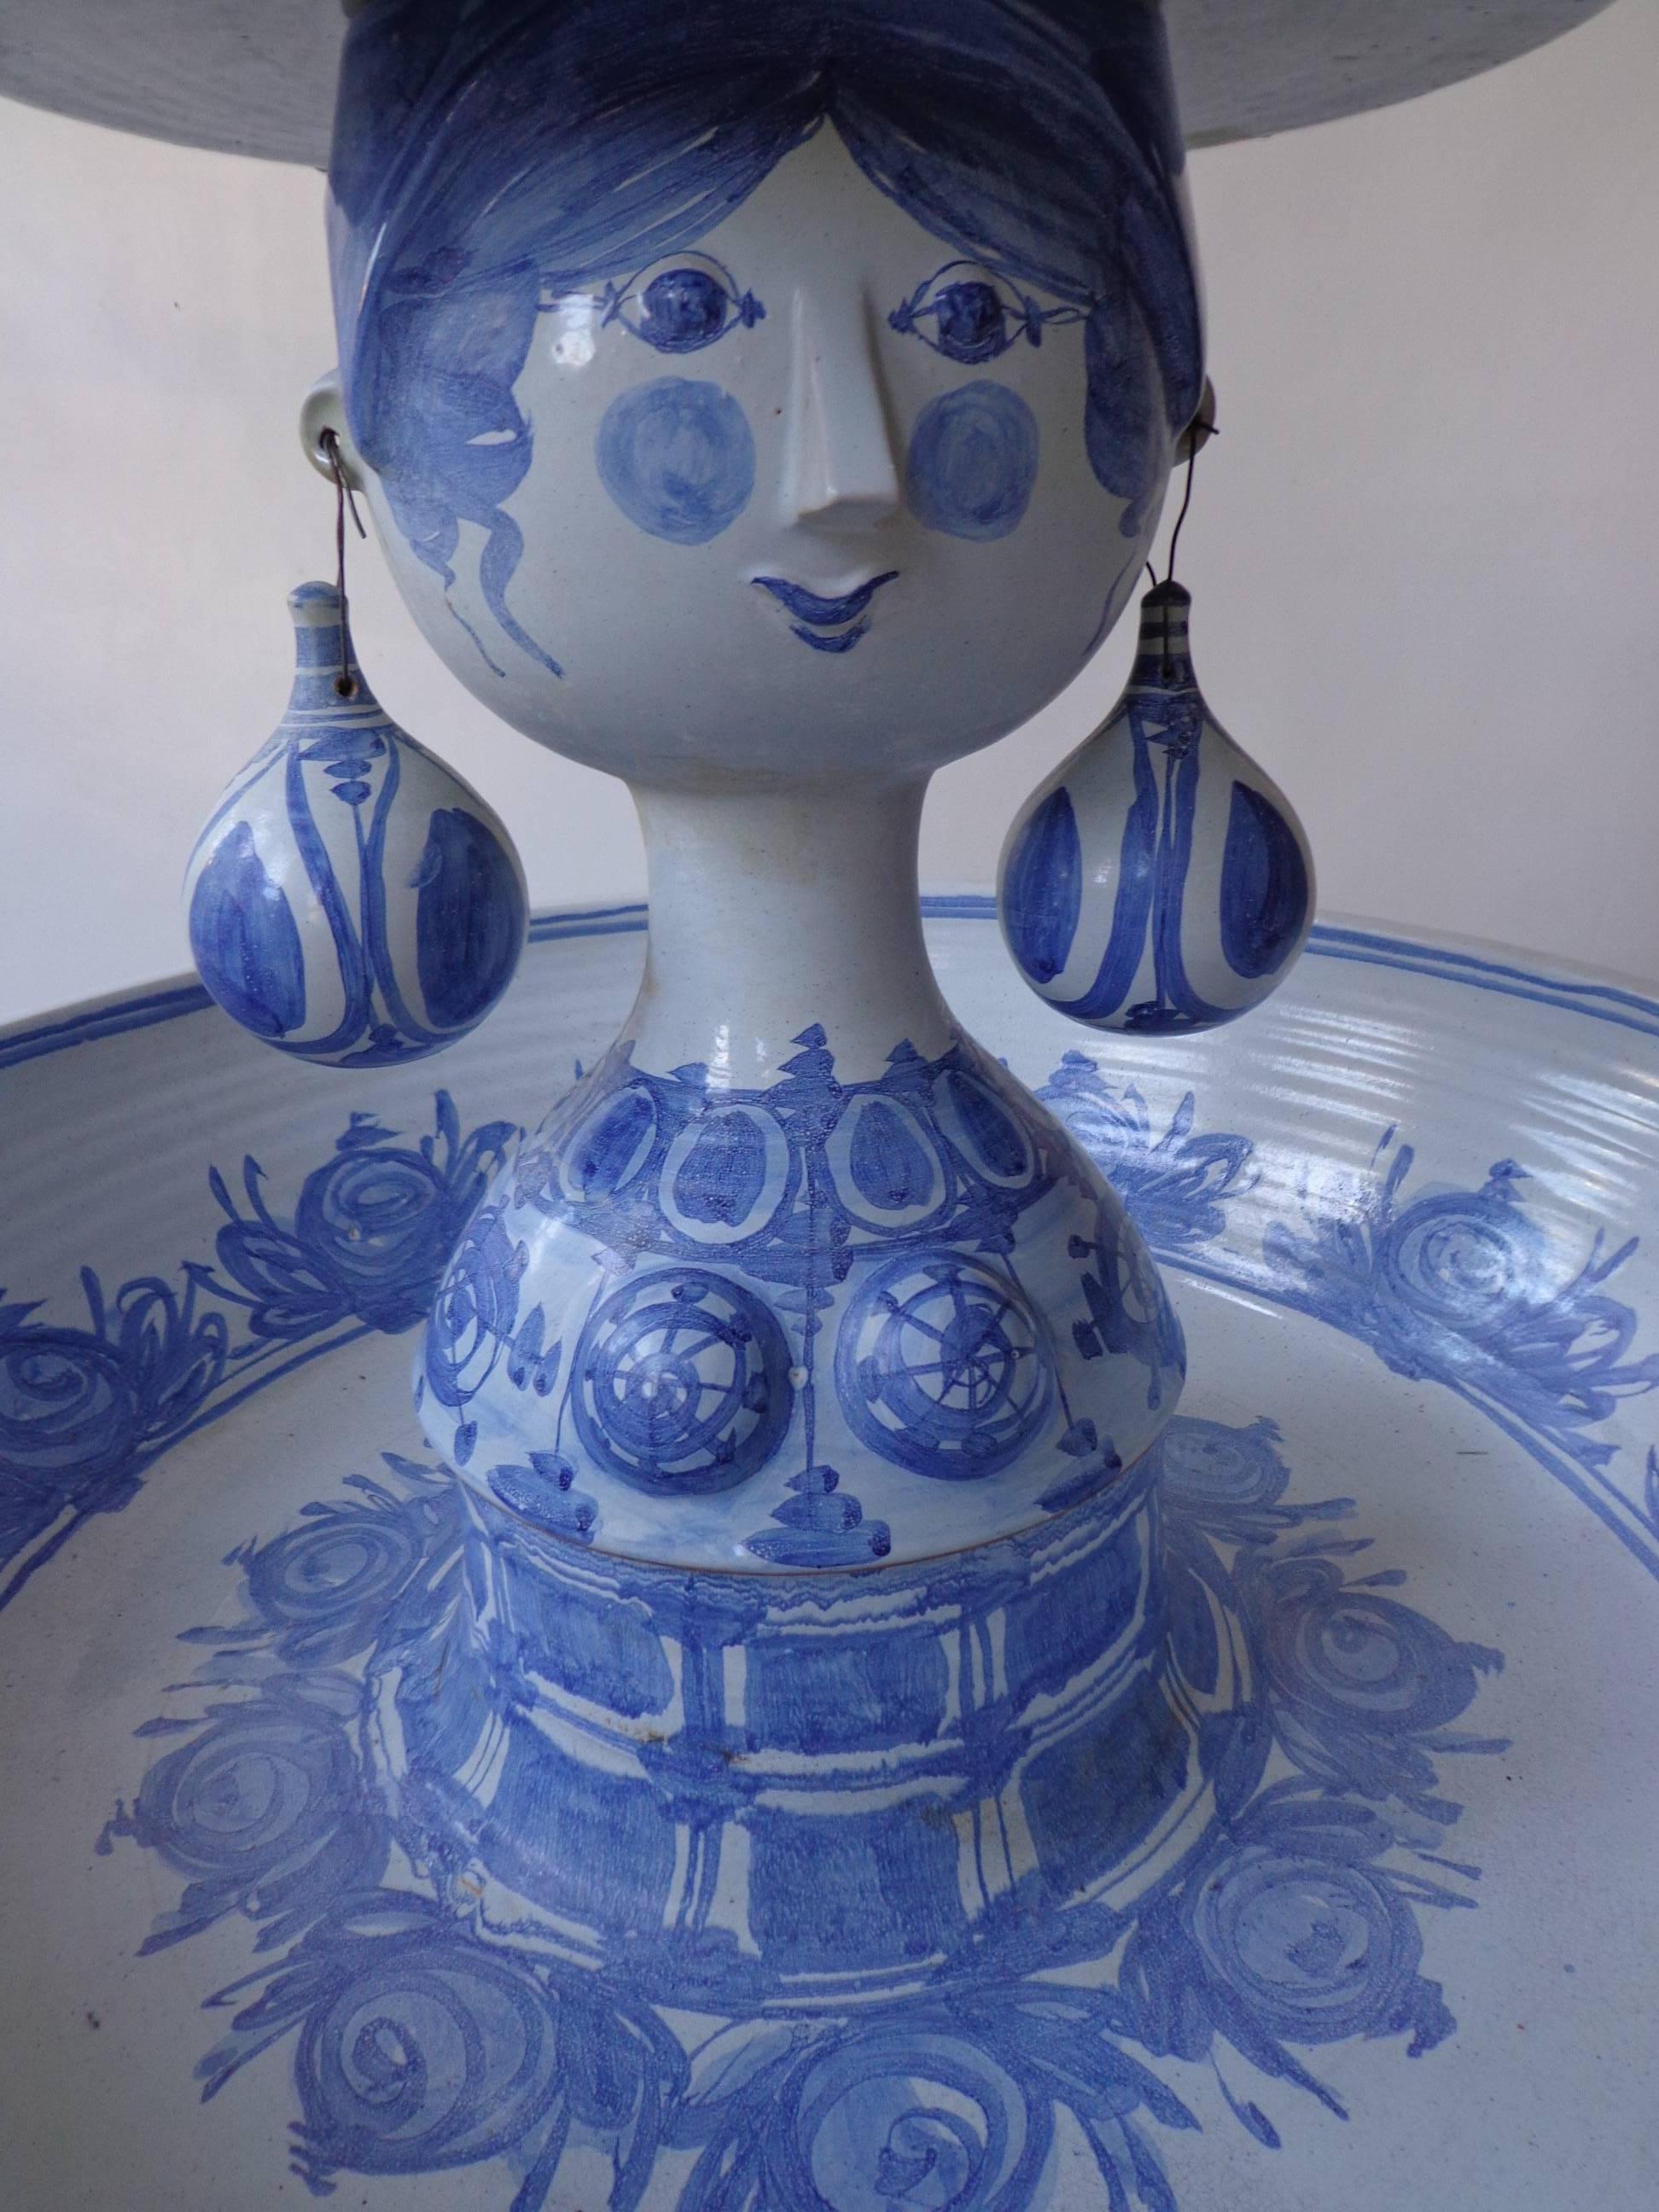 Bjørn Wiinblad, Danish, 1918-2006.
Unique monumental ceramic fountain with blue, white glaze. Woman with hat decorated with earrings and flowers. 
Five pieces: Hat, woman, earrings, vessel and reservoir. Measures: H 120 cm, vessel diameter 80